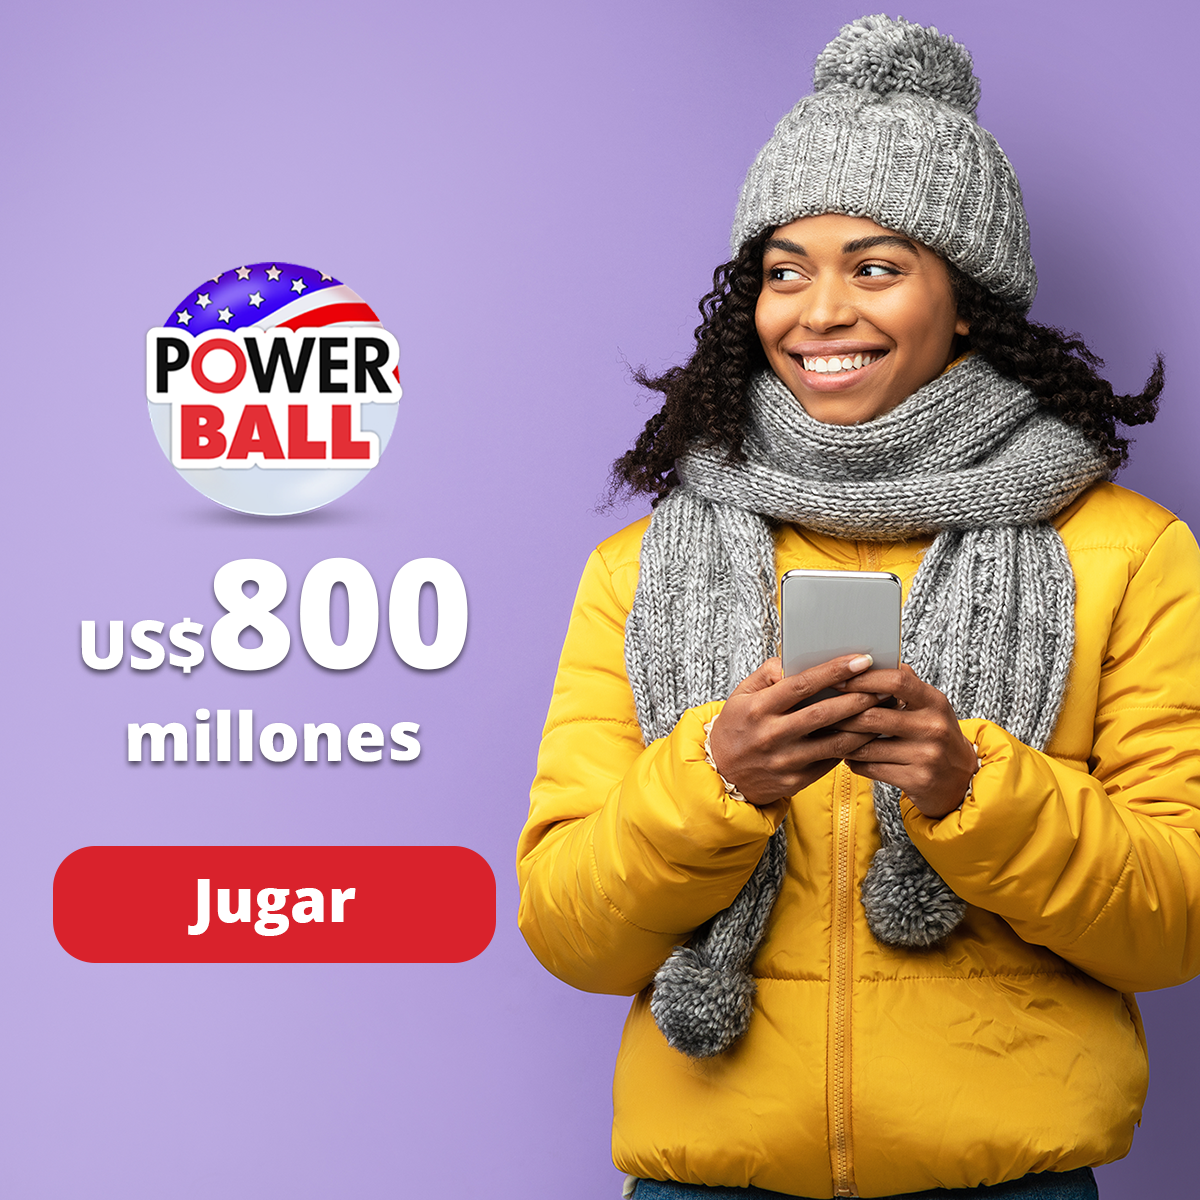 Powerball- Llévate US $800 millones con The Lotter